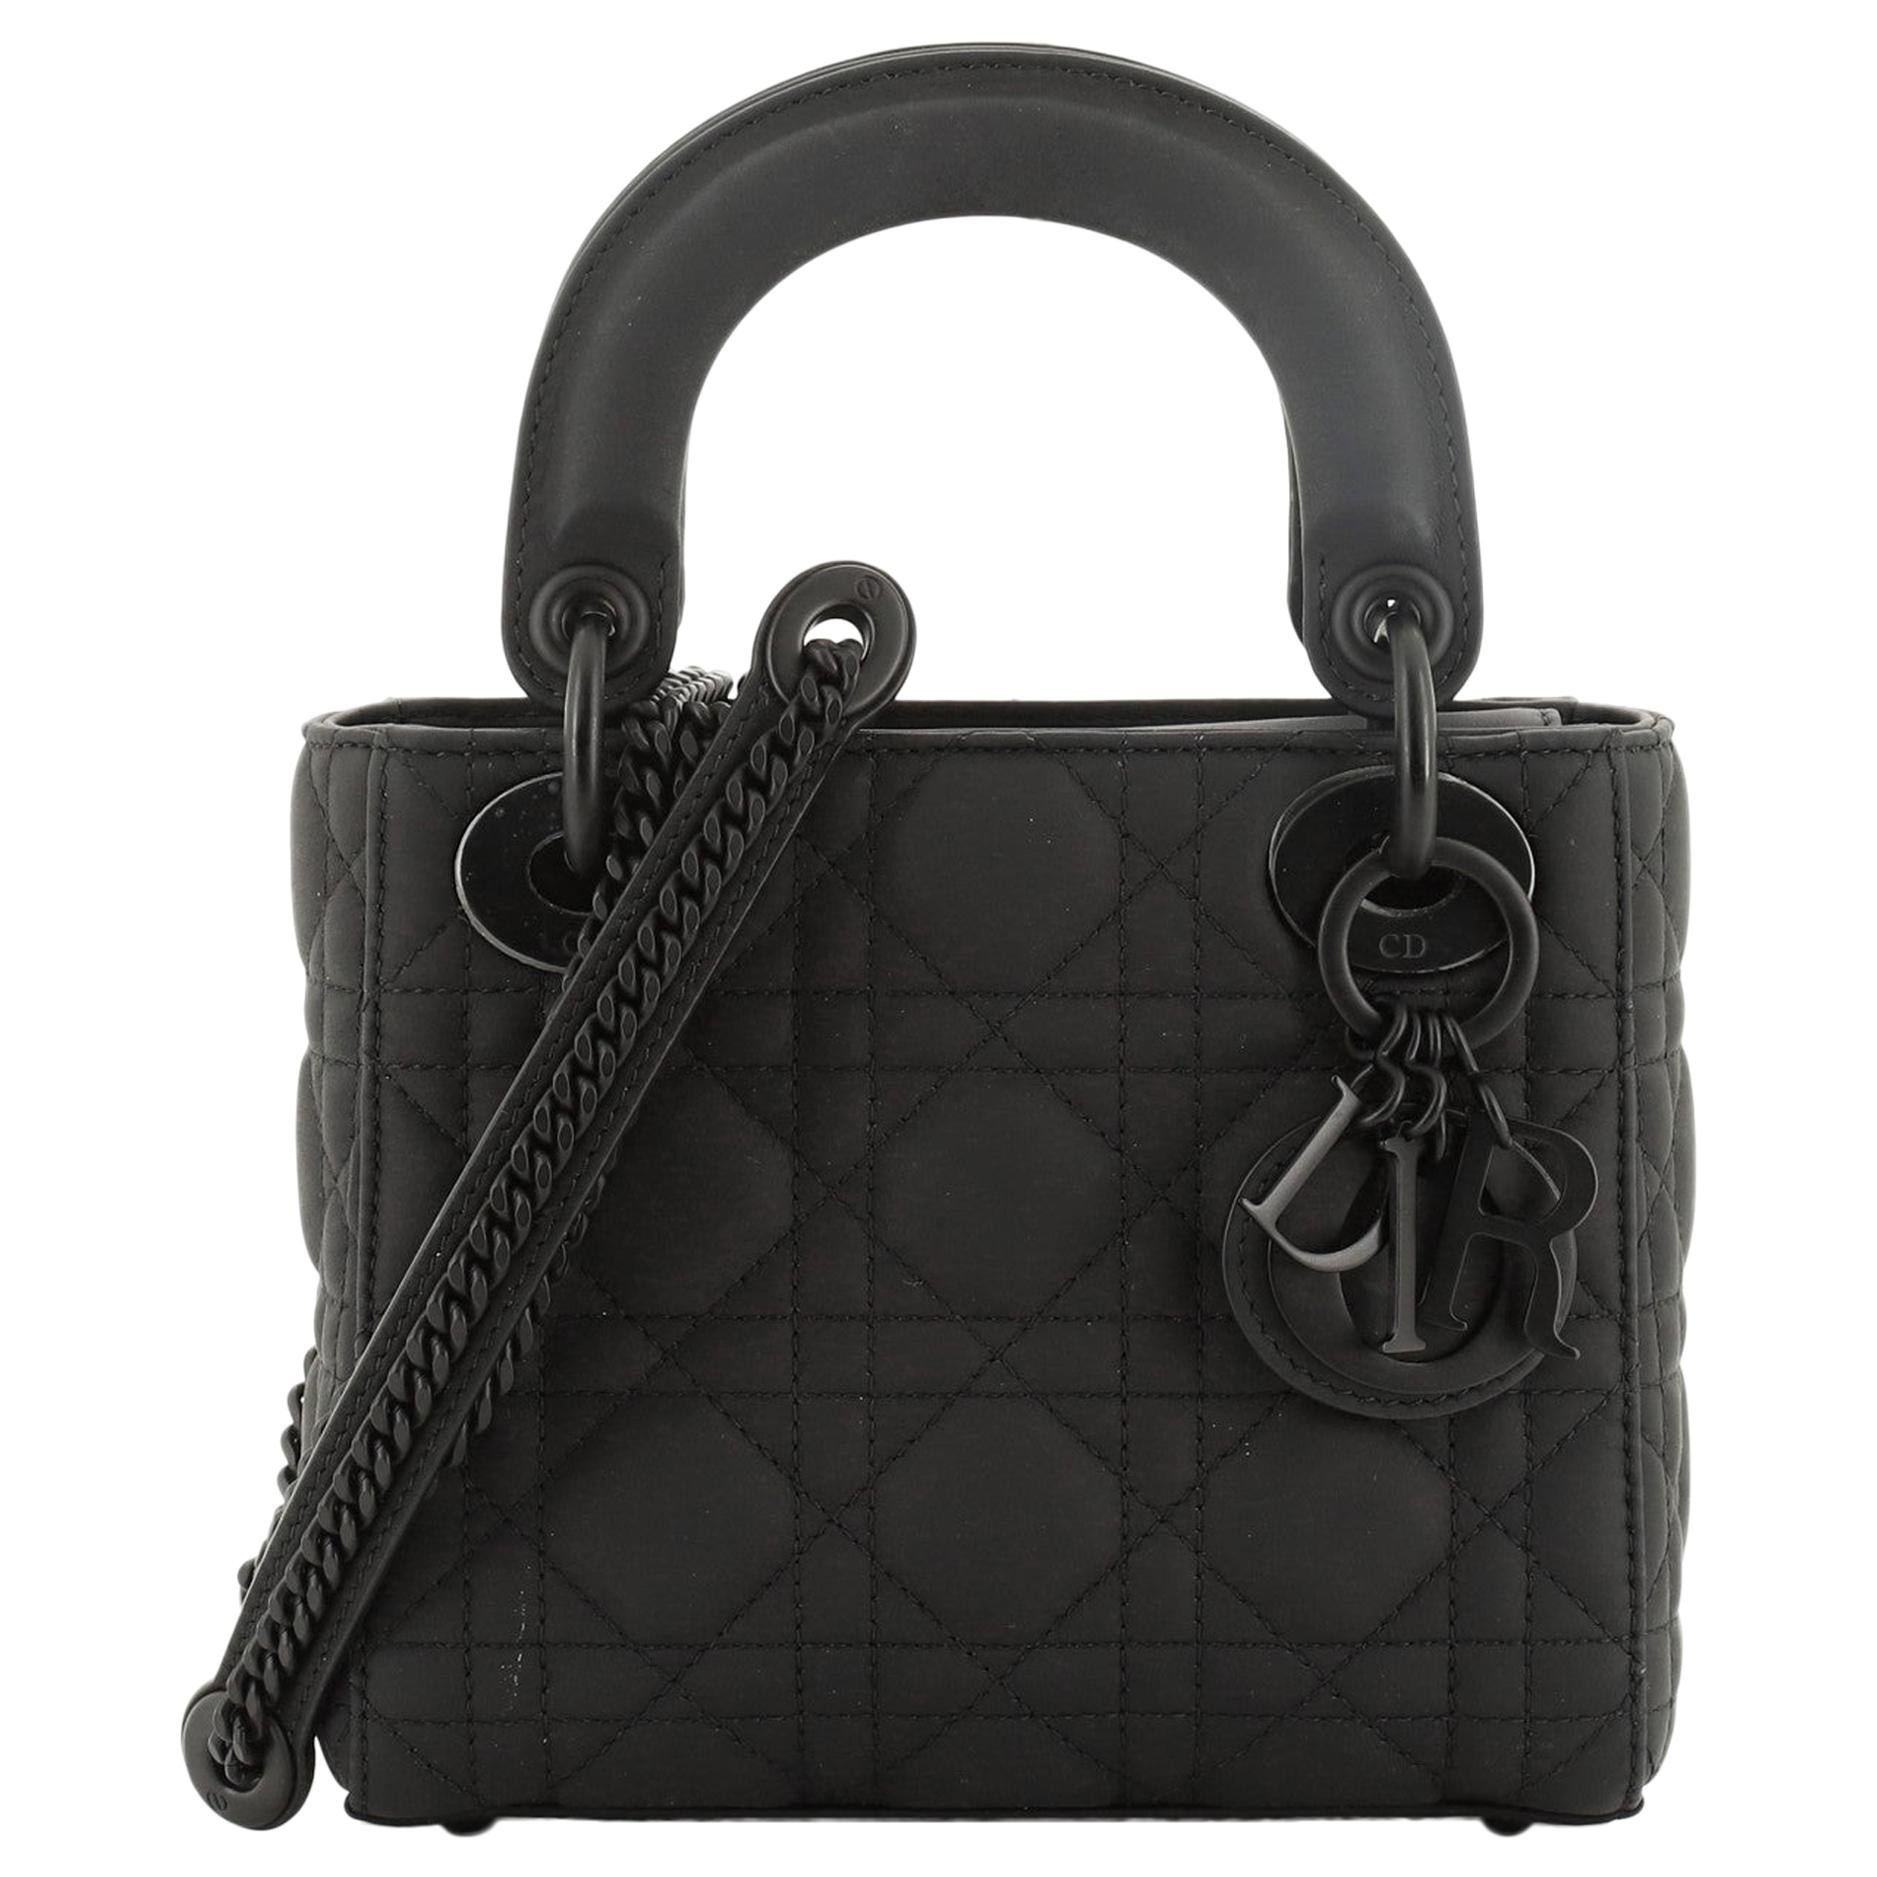 Dior Introduces Black UltraMatte Bags  BagAddicts Anonymous